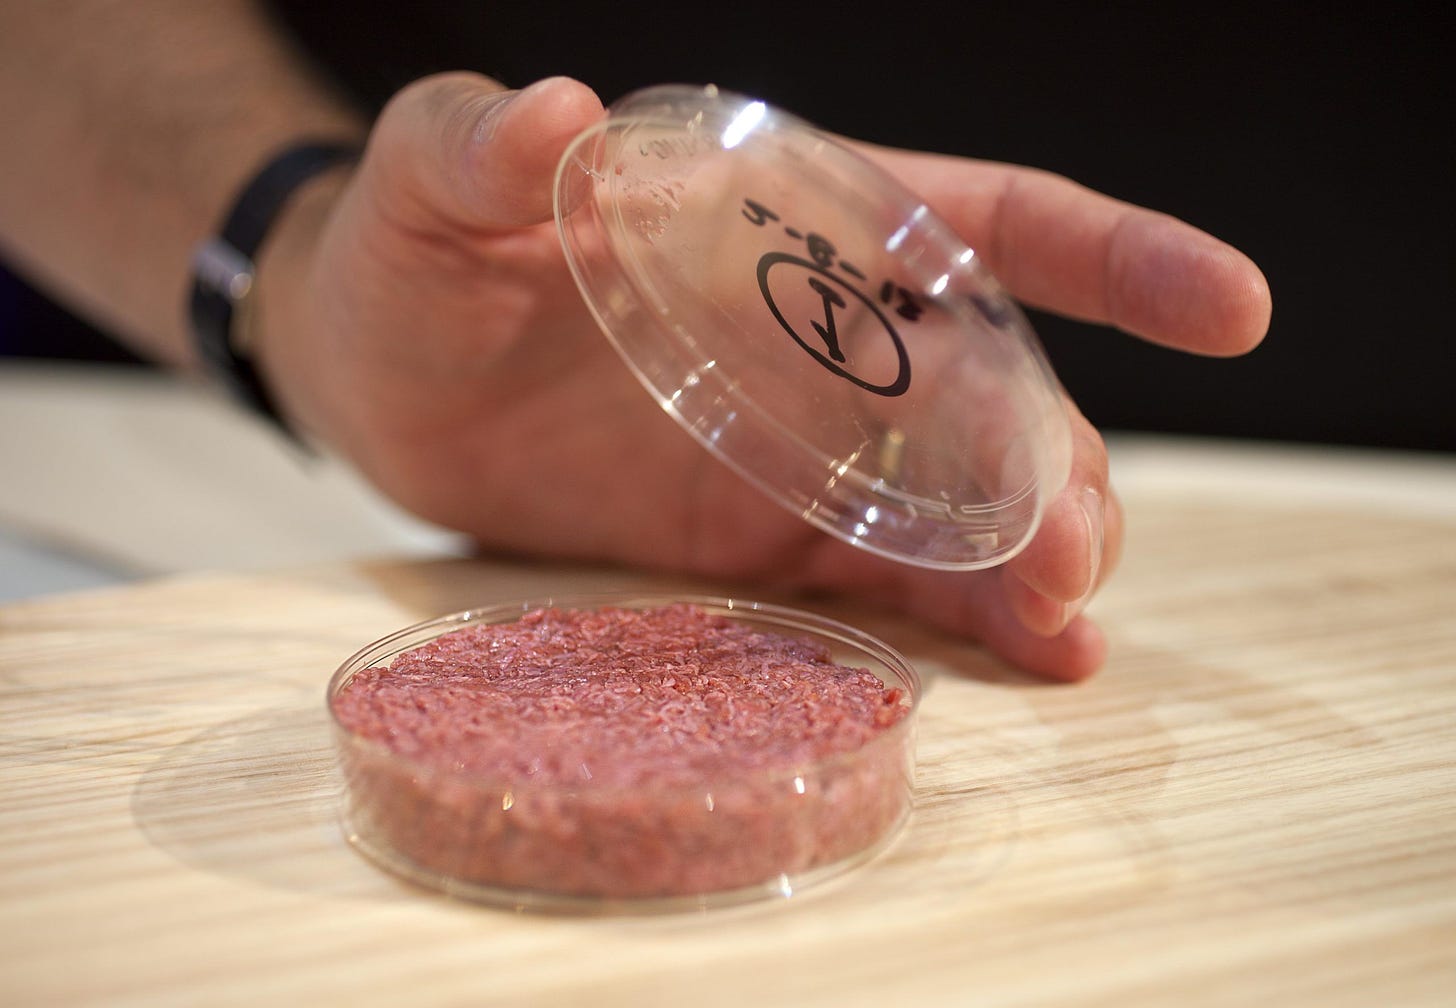 Scale is the Real Barrier for Lab-Grown Meat - AgFunderNews